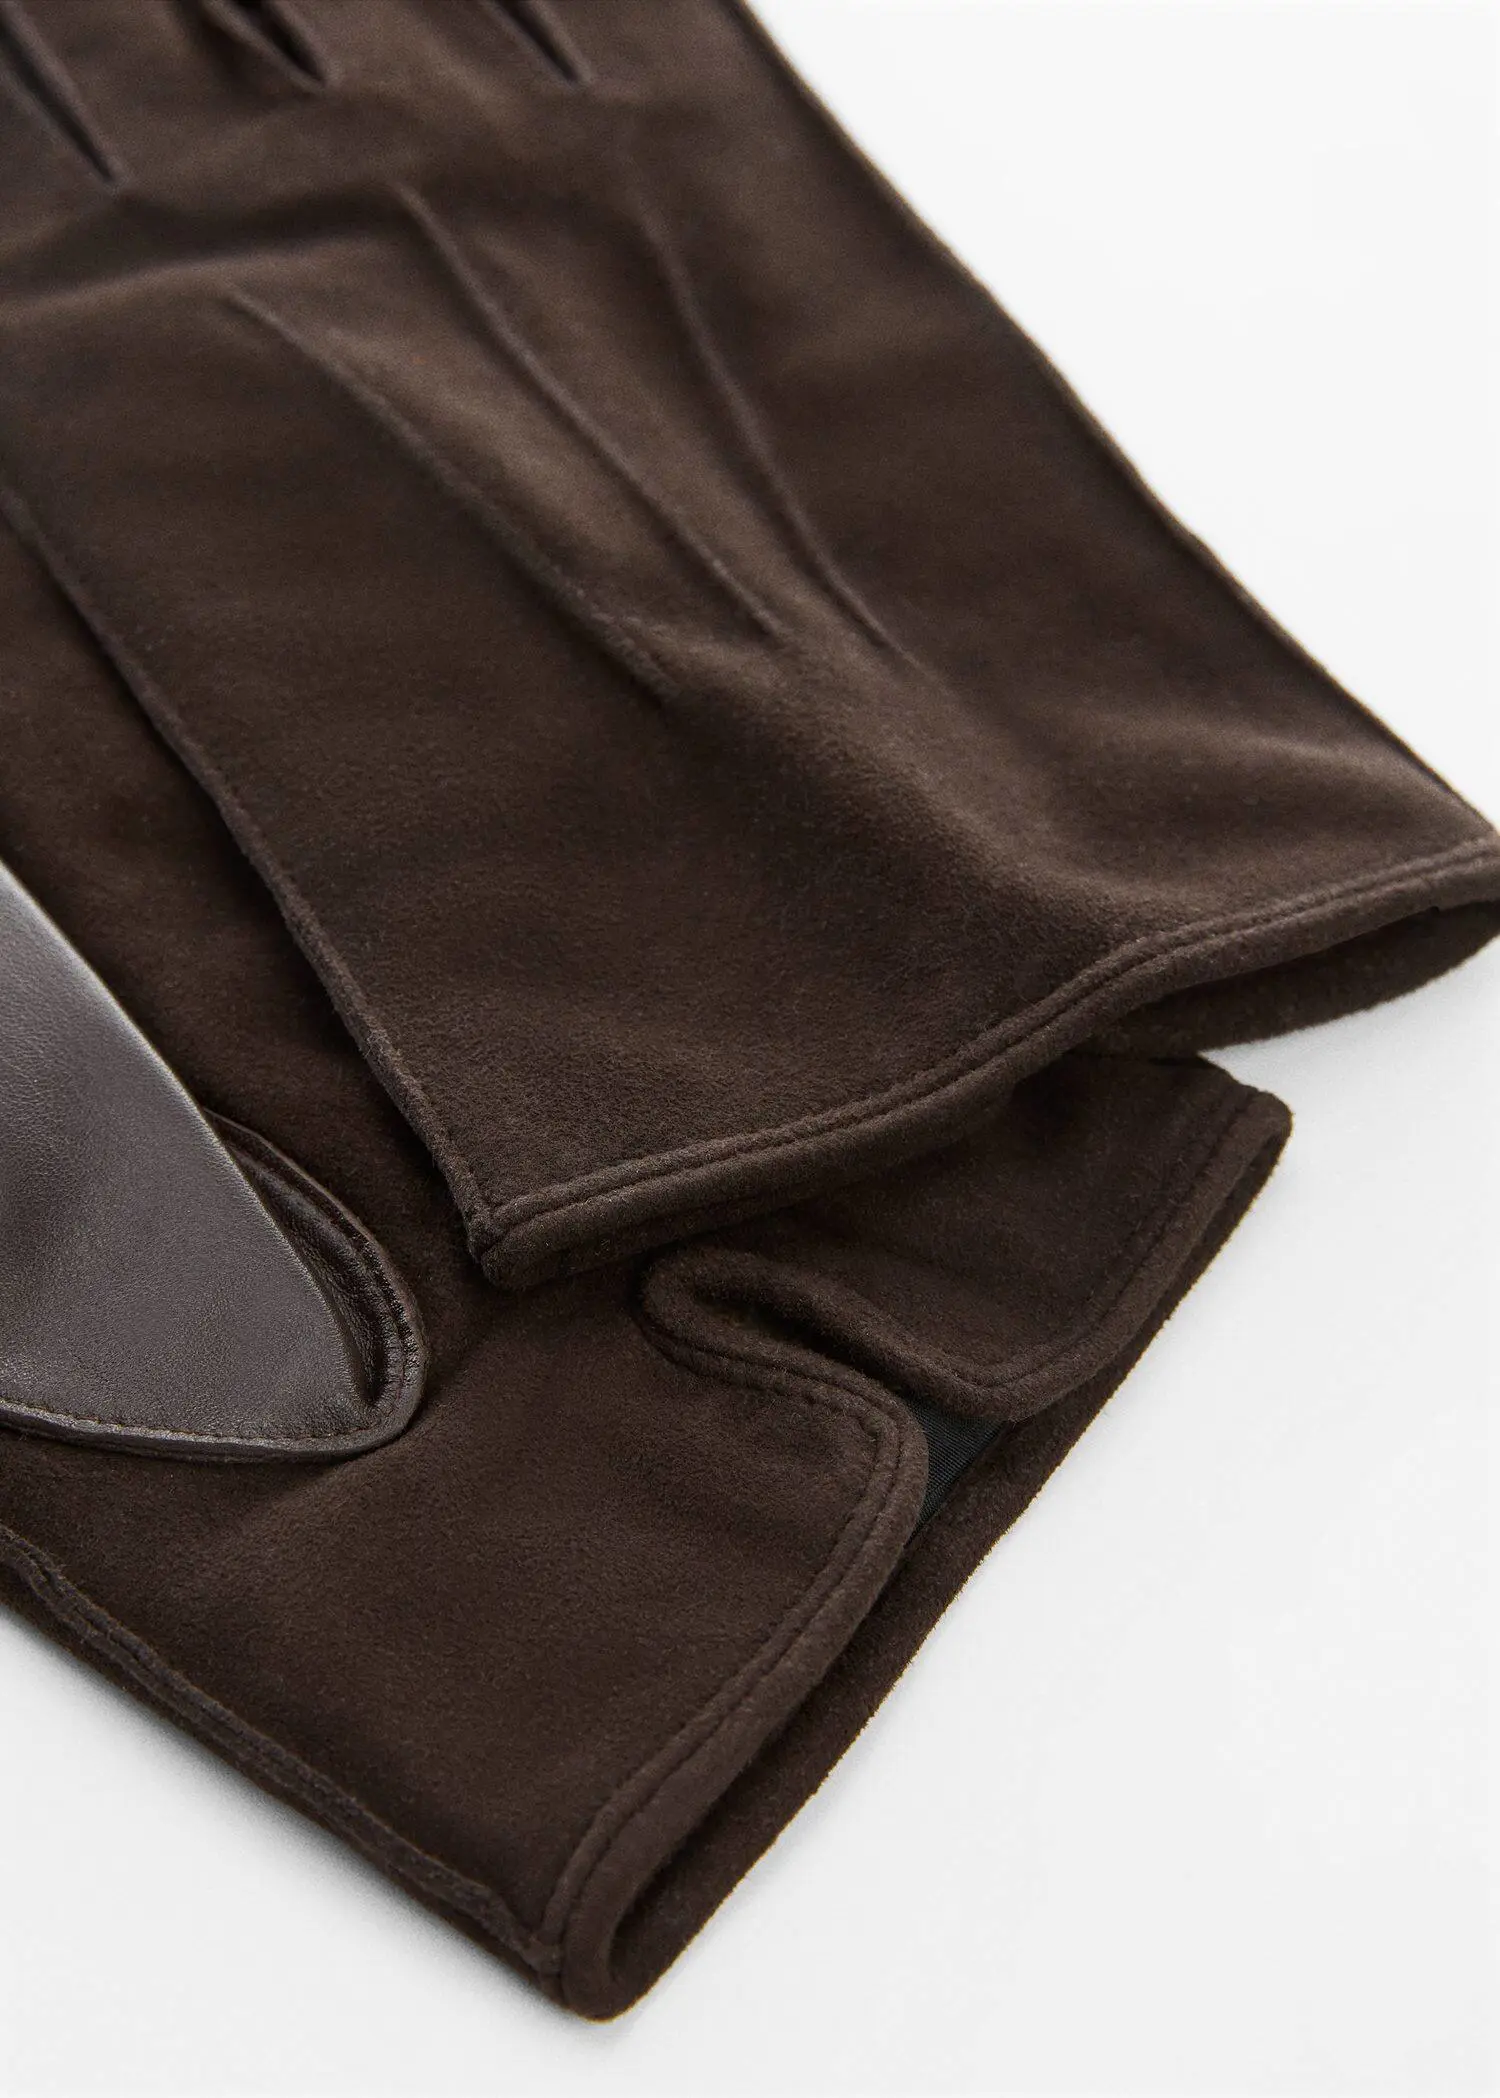 Mango Suede leather gloves with wool lining. 1